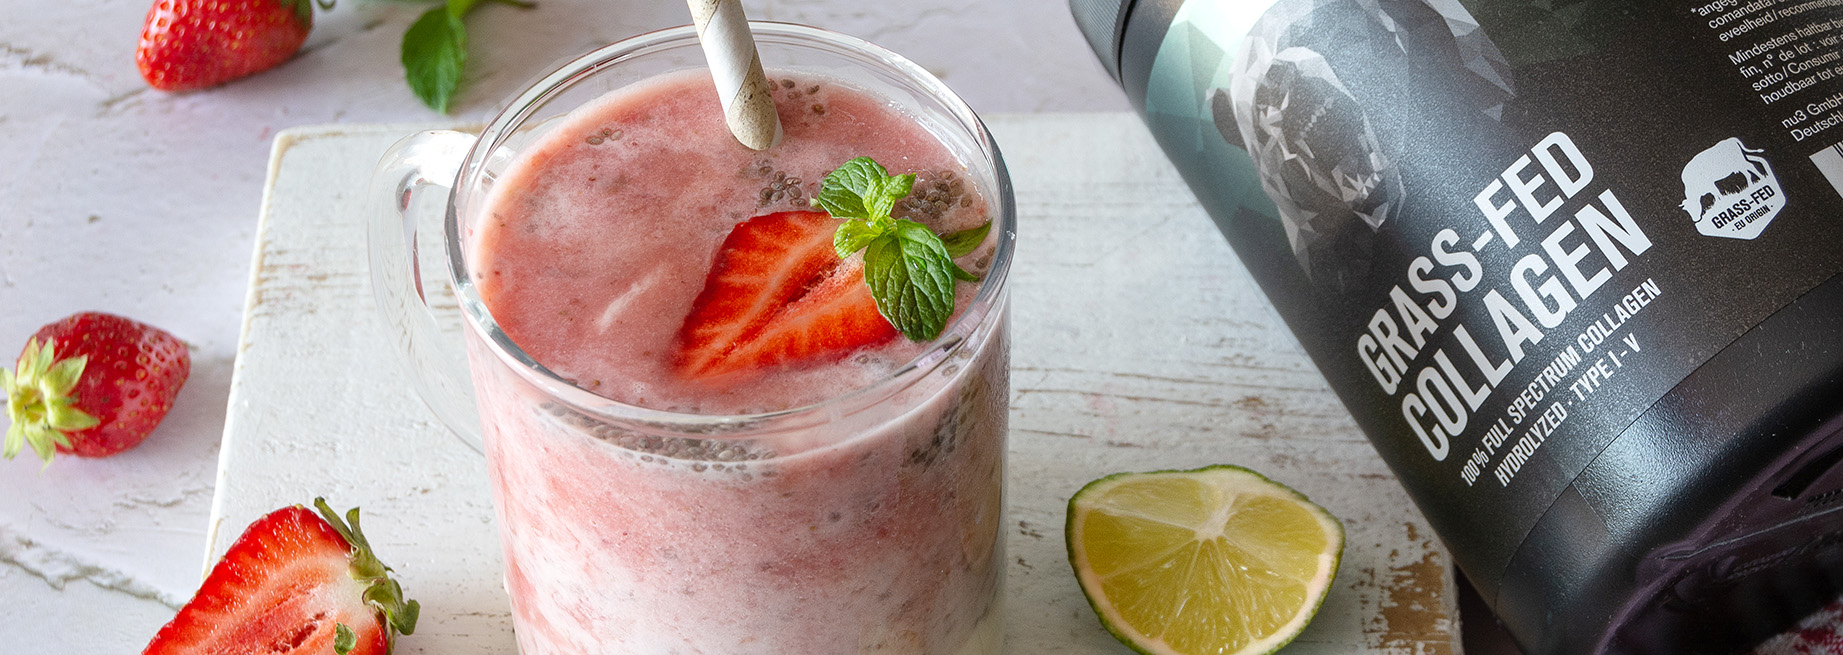 Beauty smoothie di fragole